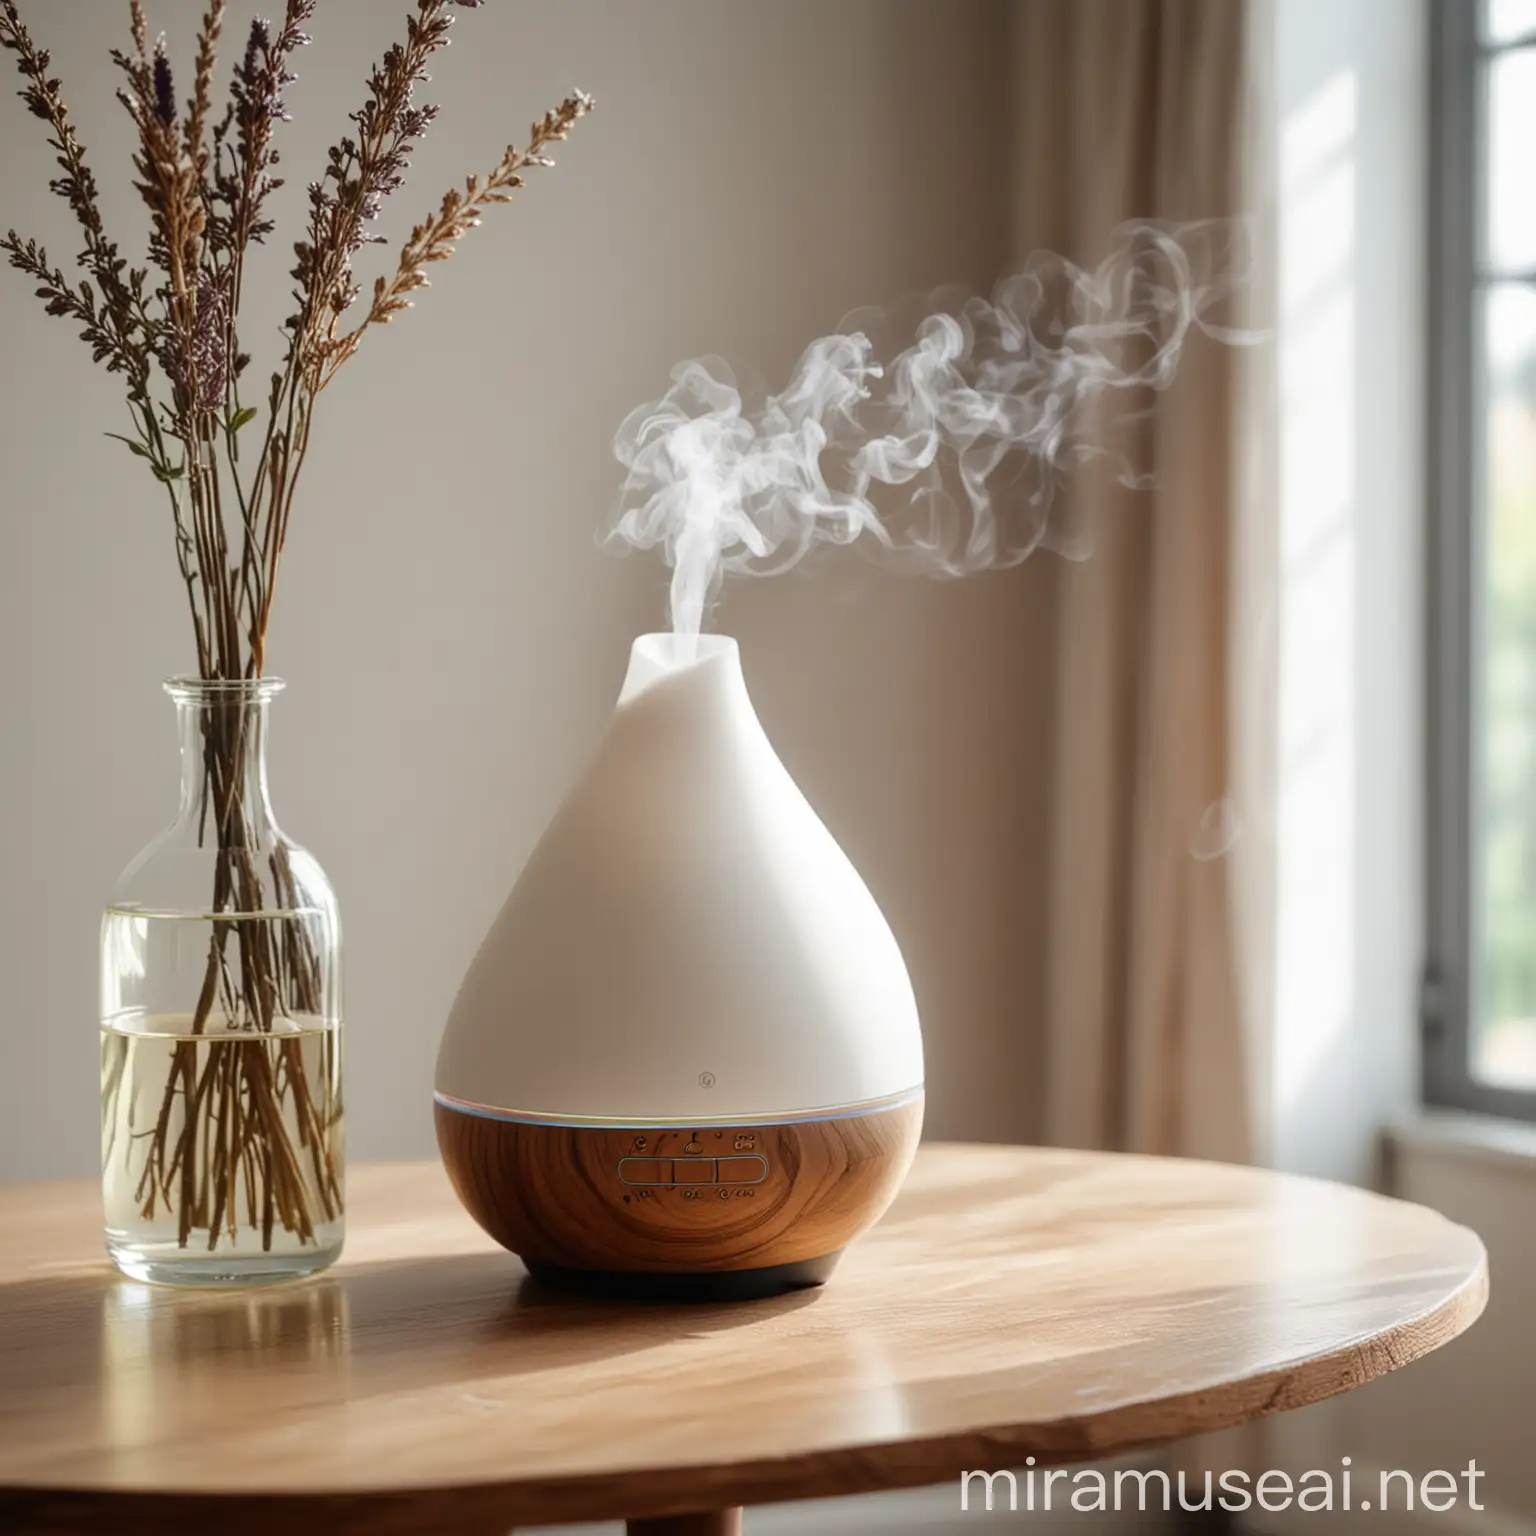 Clean Home Essential Oil Diffuser in Bright Natural Light